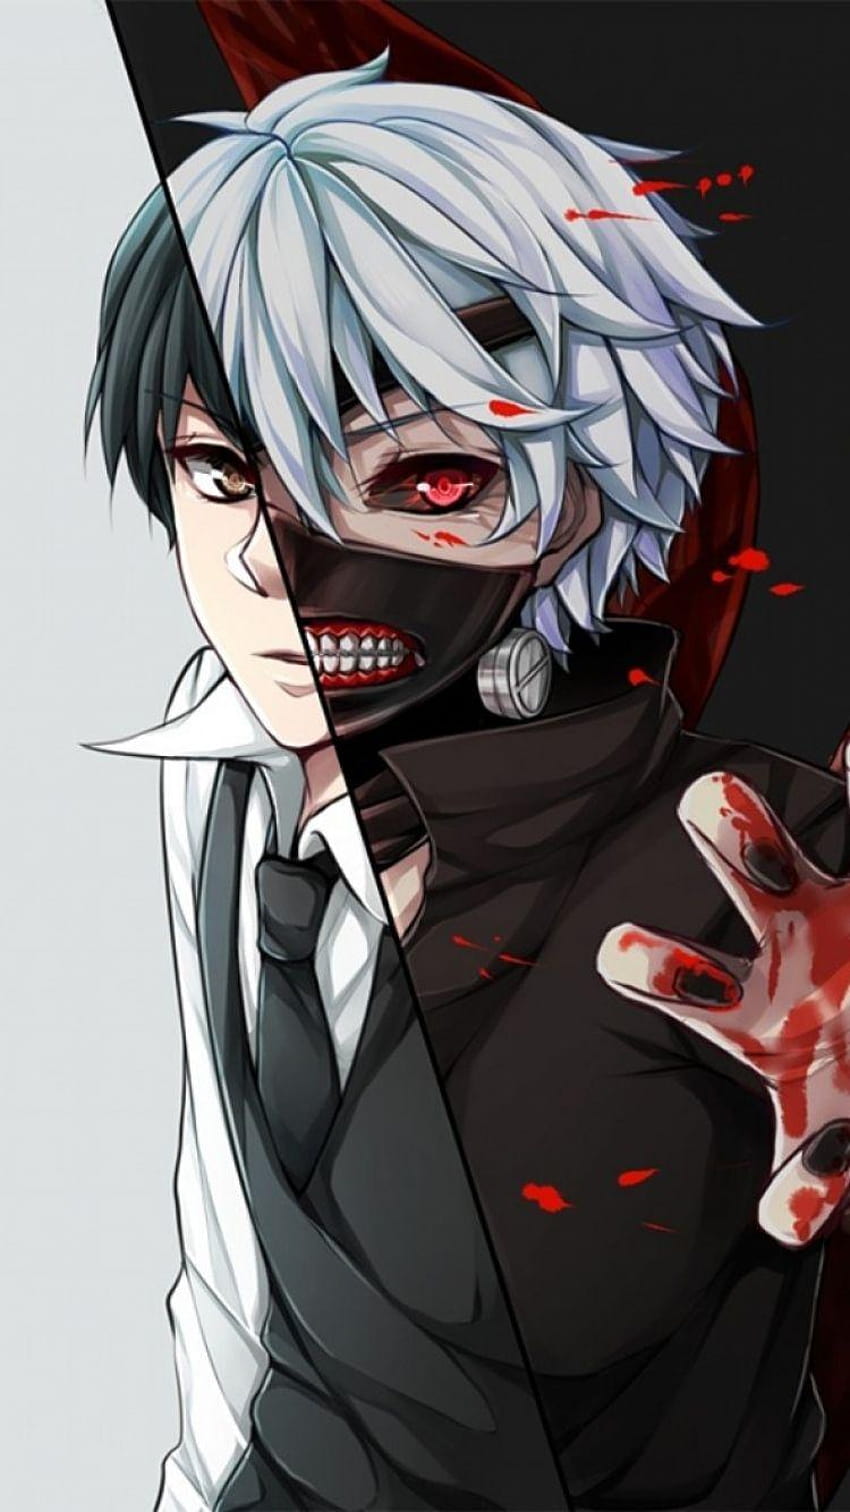 Anime Tokyo Ghoul Untuk Android, & backgrounds, android anime tokyo ghoul HD phone wallpaper